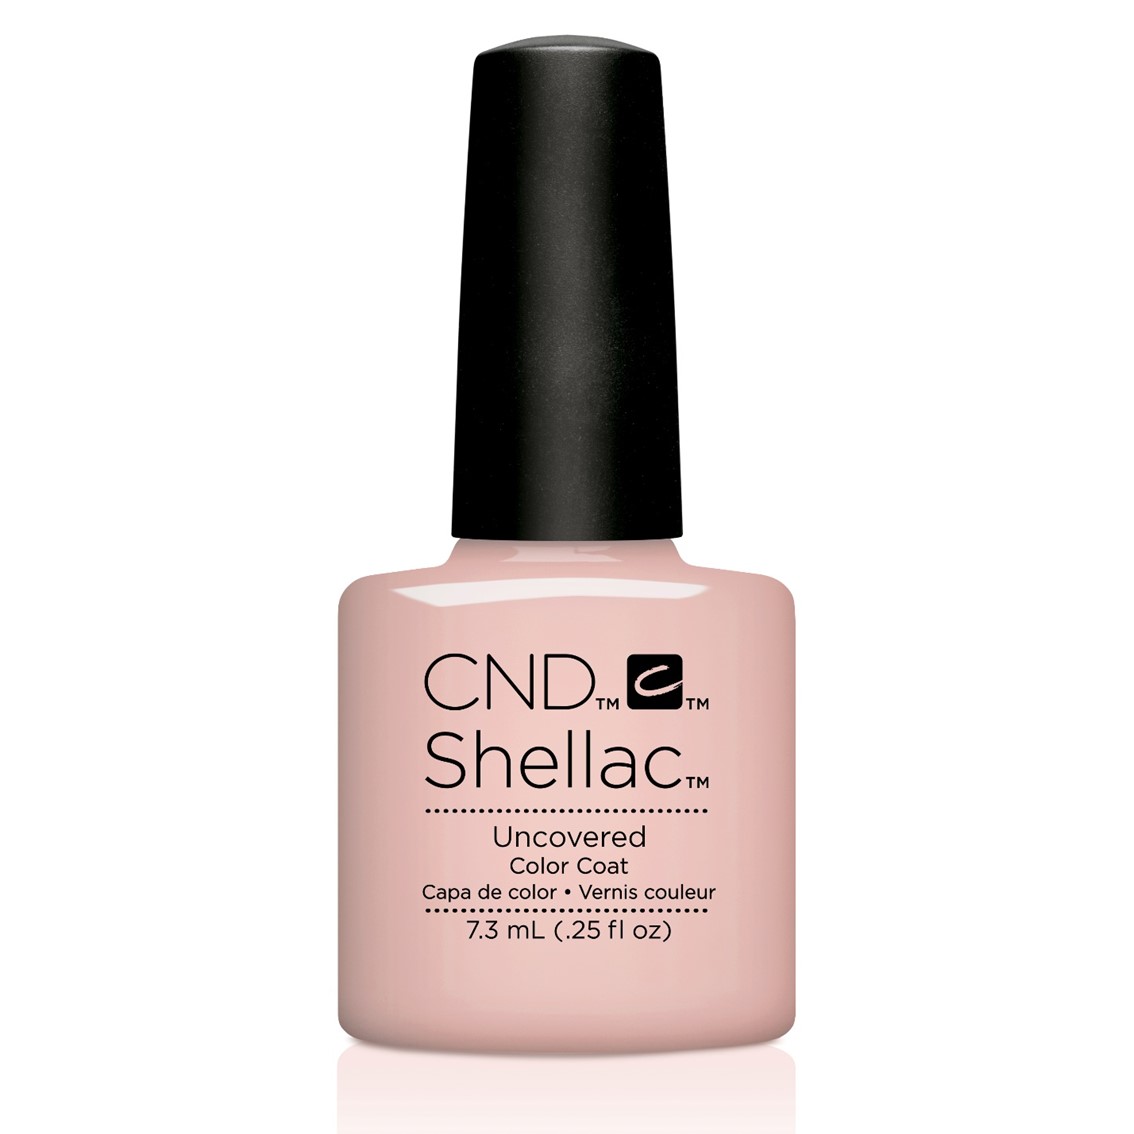 CND™ SHELLAC Uncovered